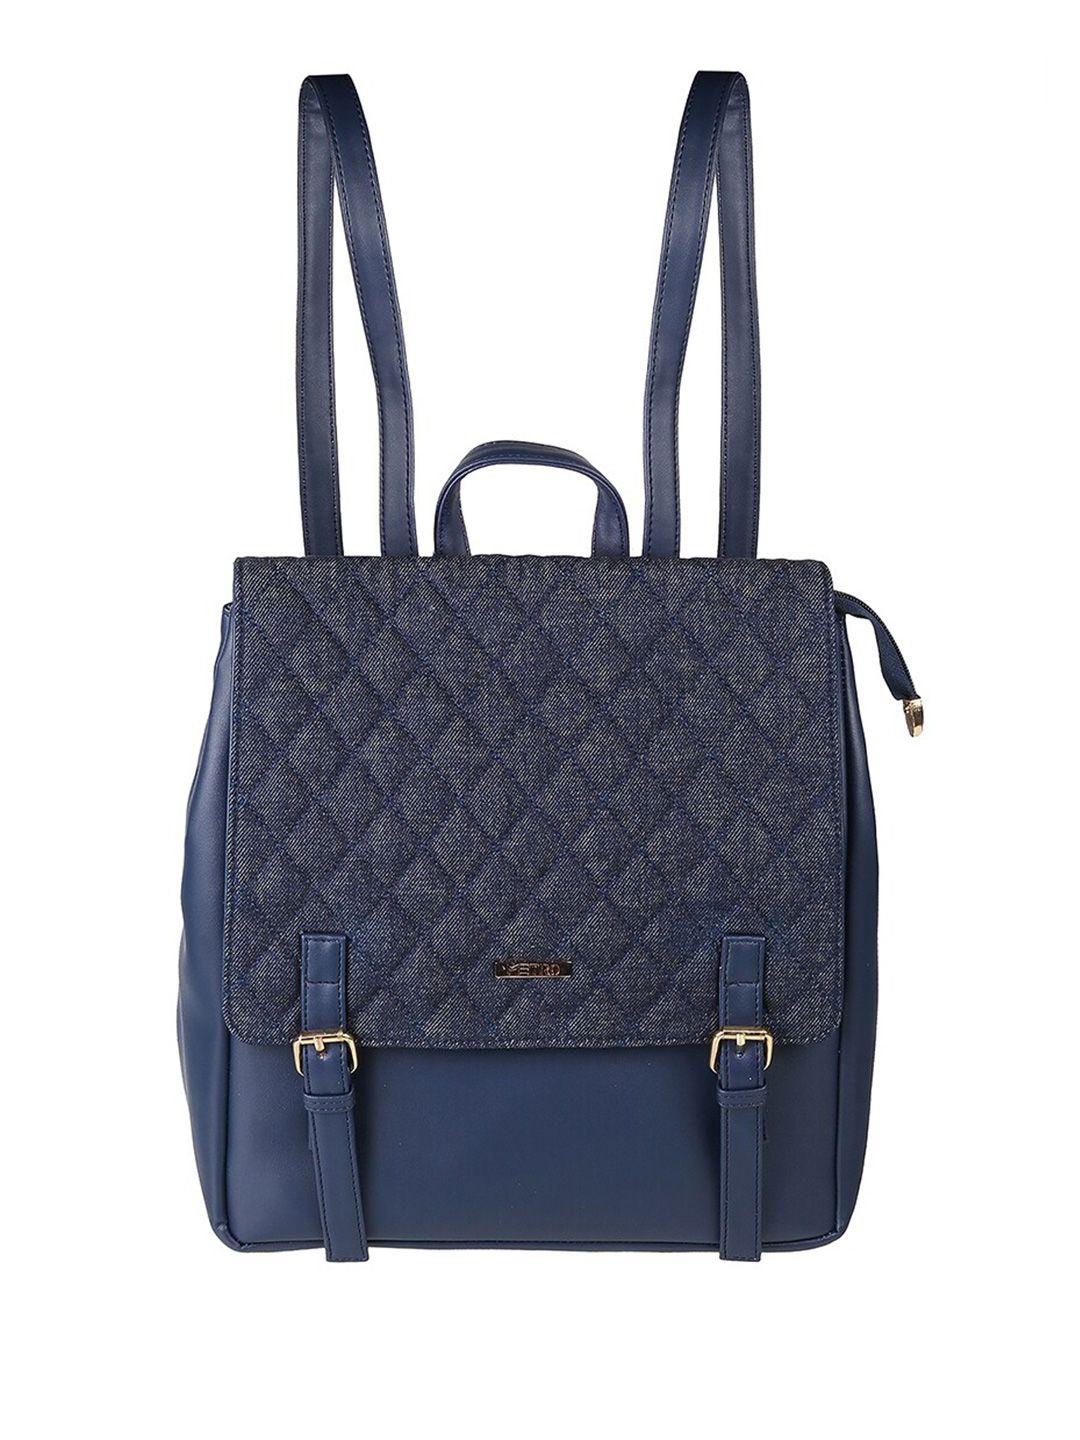 metro structured shoulder bag with quilted